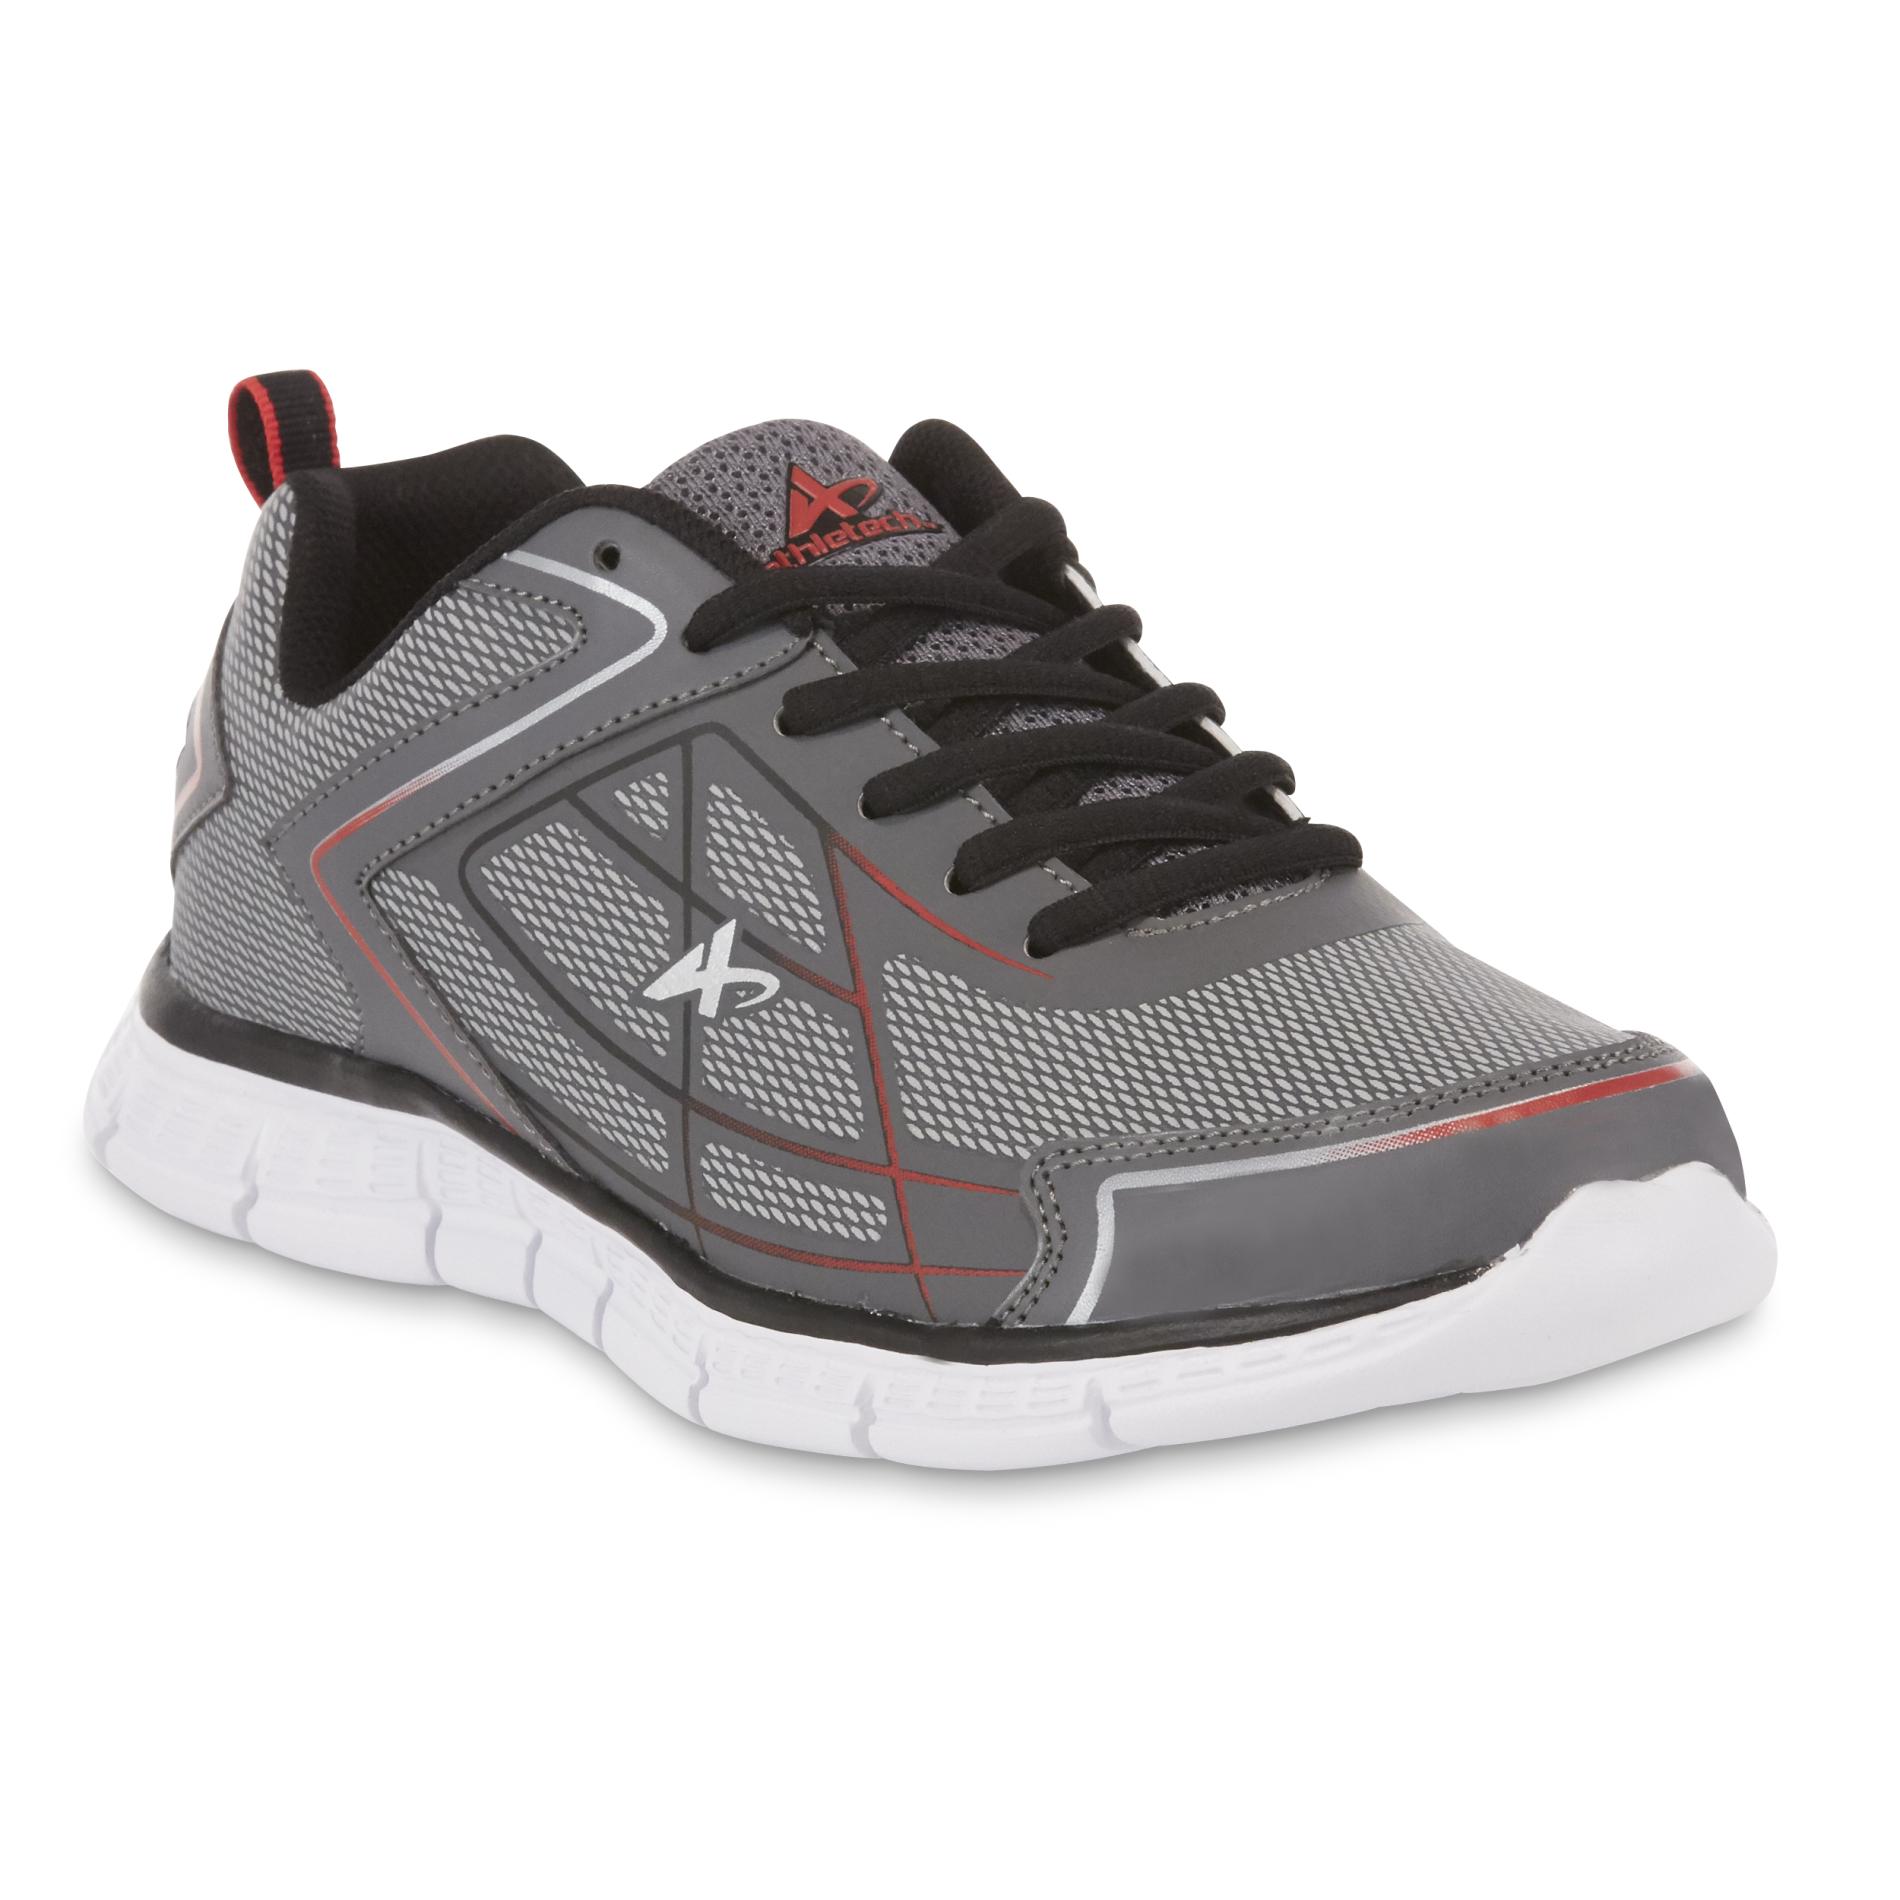 Athletech Men's Tribal Athletic Shoe - Gray/Red